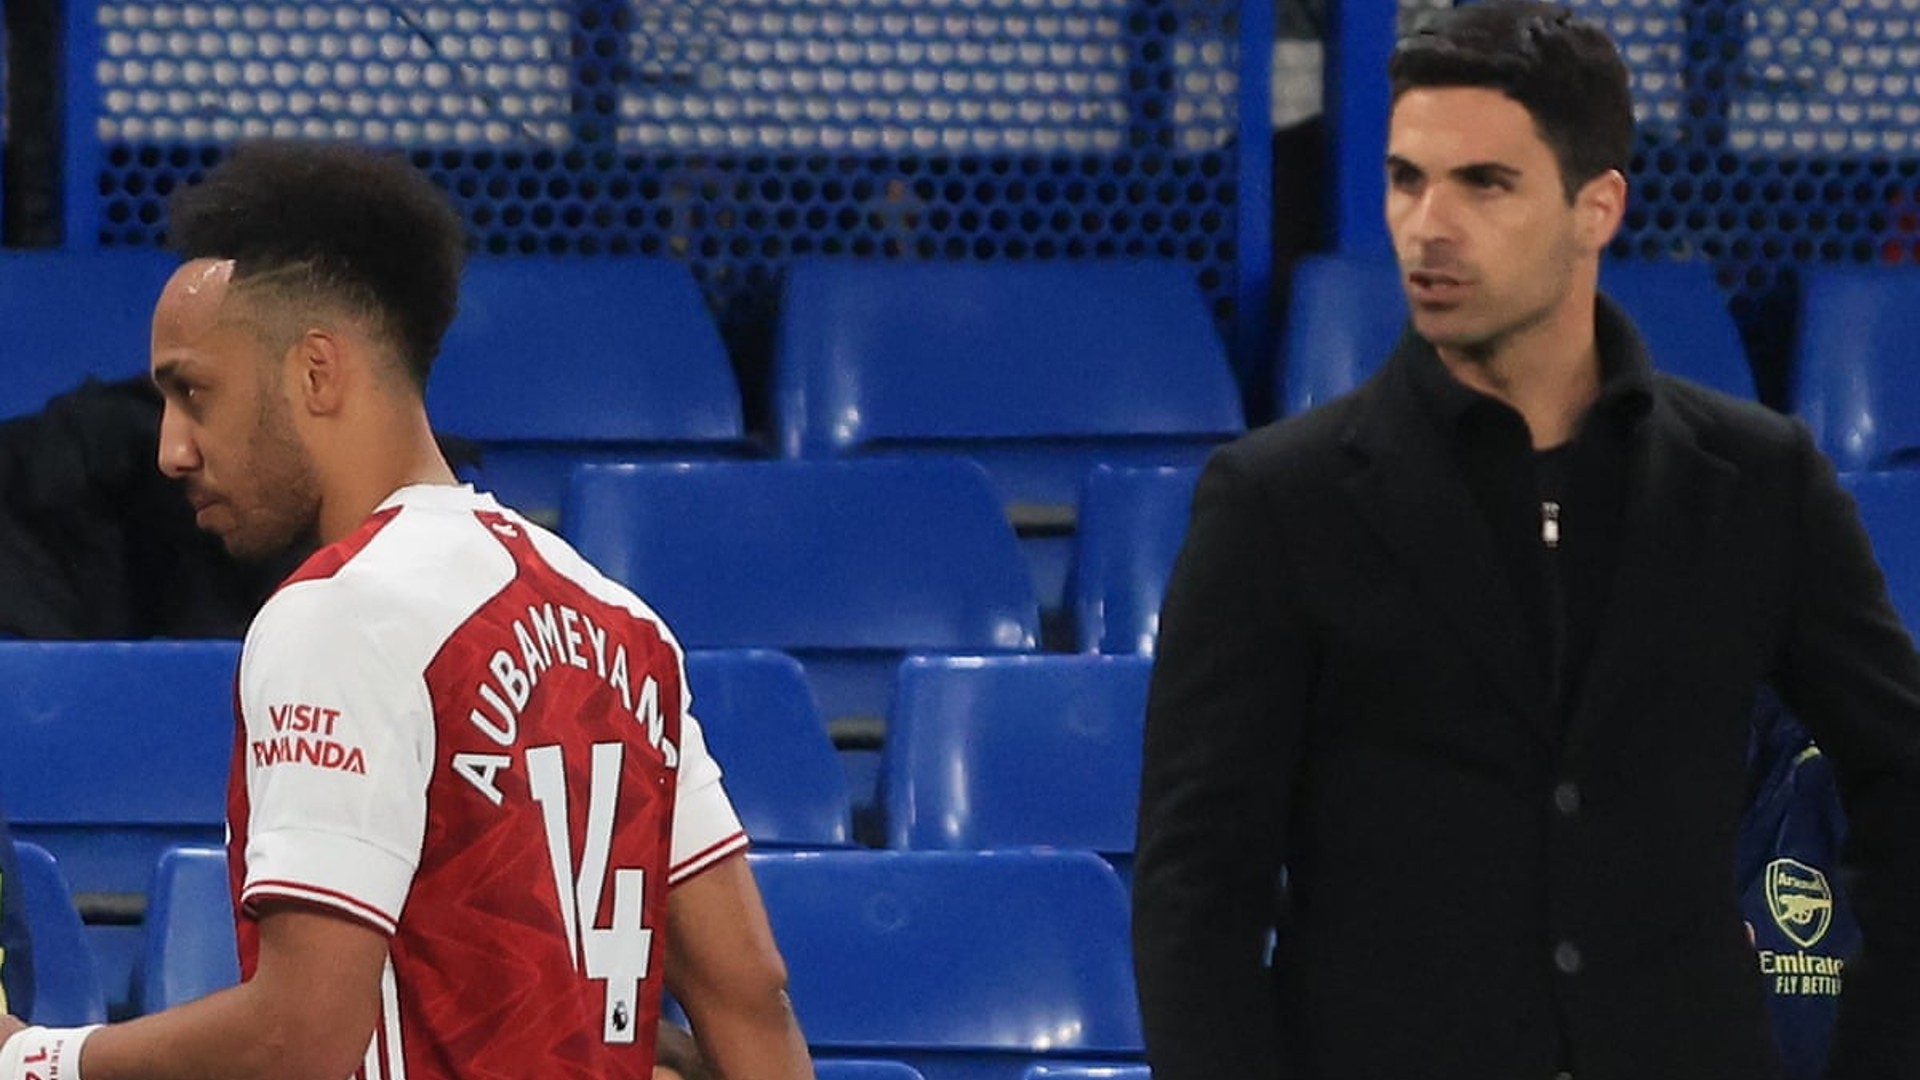 Arteta is a professional to the extreme since his playing days and suffers no fools as Pierre-Emerick Aubameyang soon realised. (Image Credit: Getty Images)